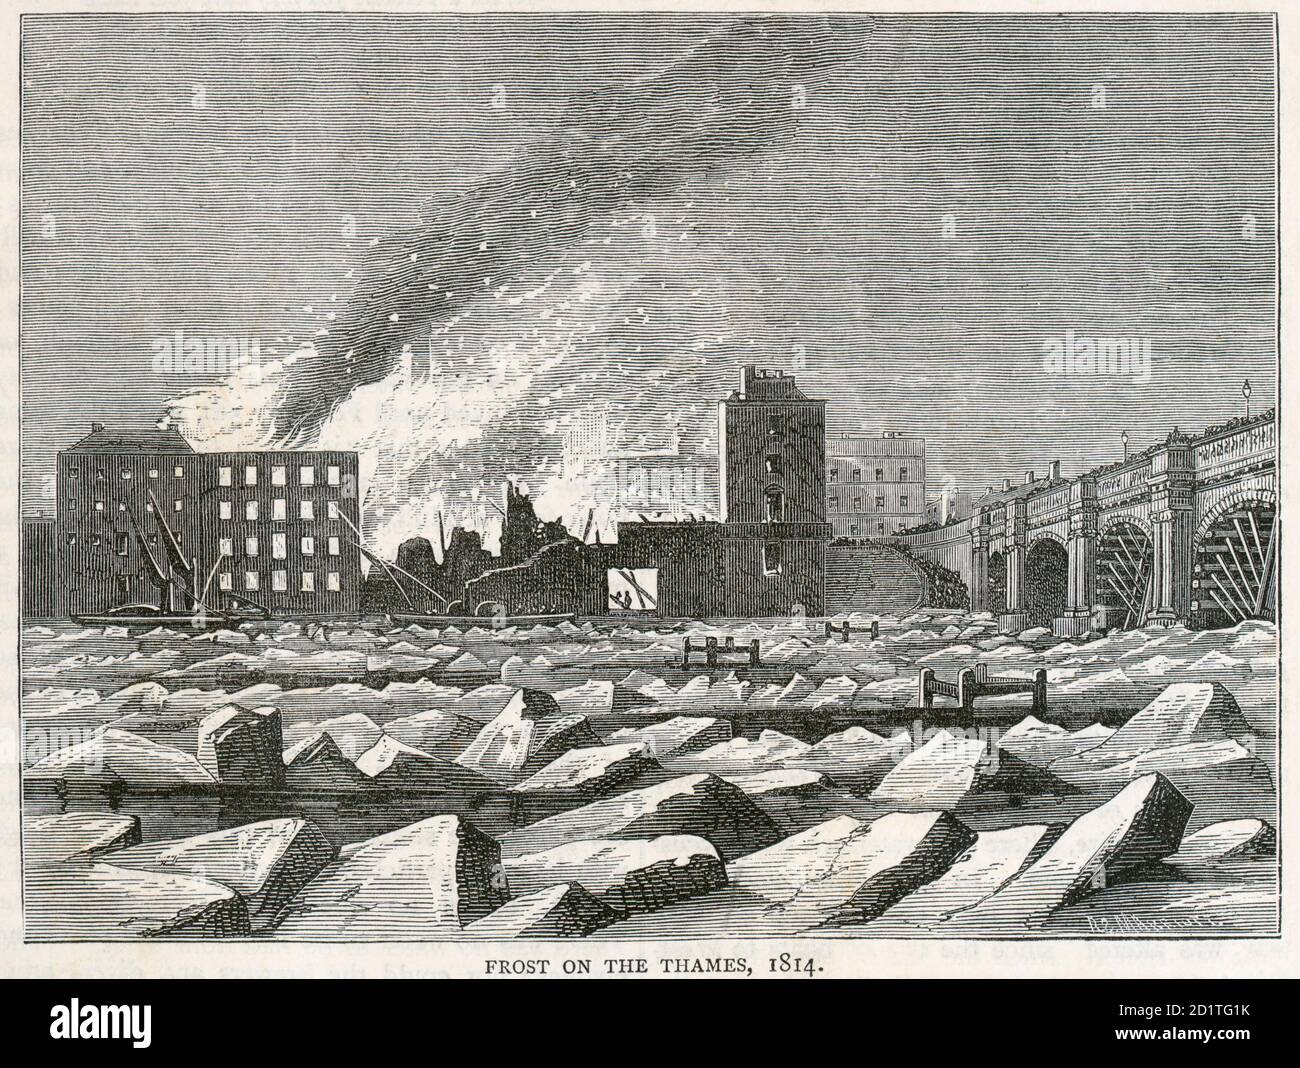 RIVER THAMES, London. Frost on the Thames, 1814 showing a fire at Albion Place. Woodcut engraving. From the Mayson Beeton Collection. Stock Photo